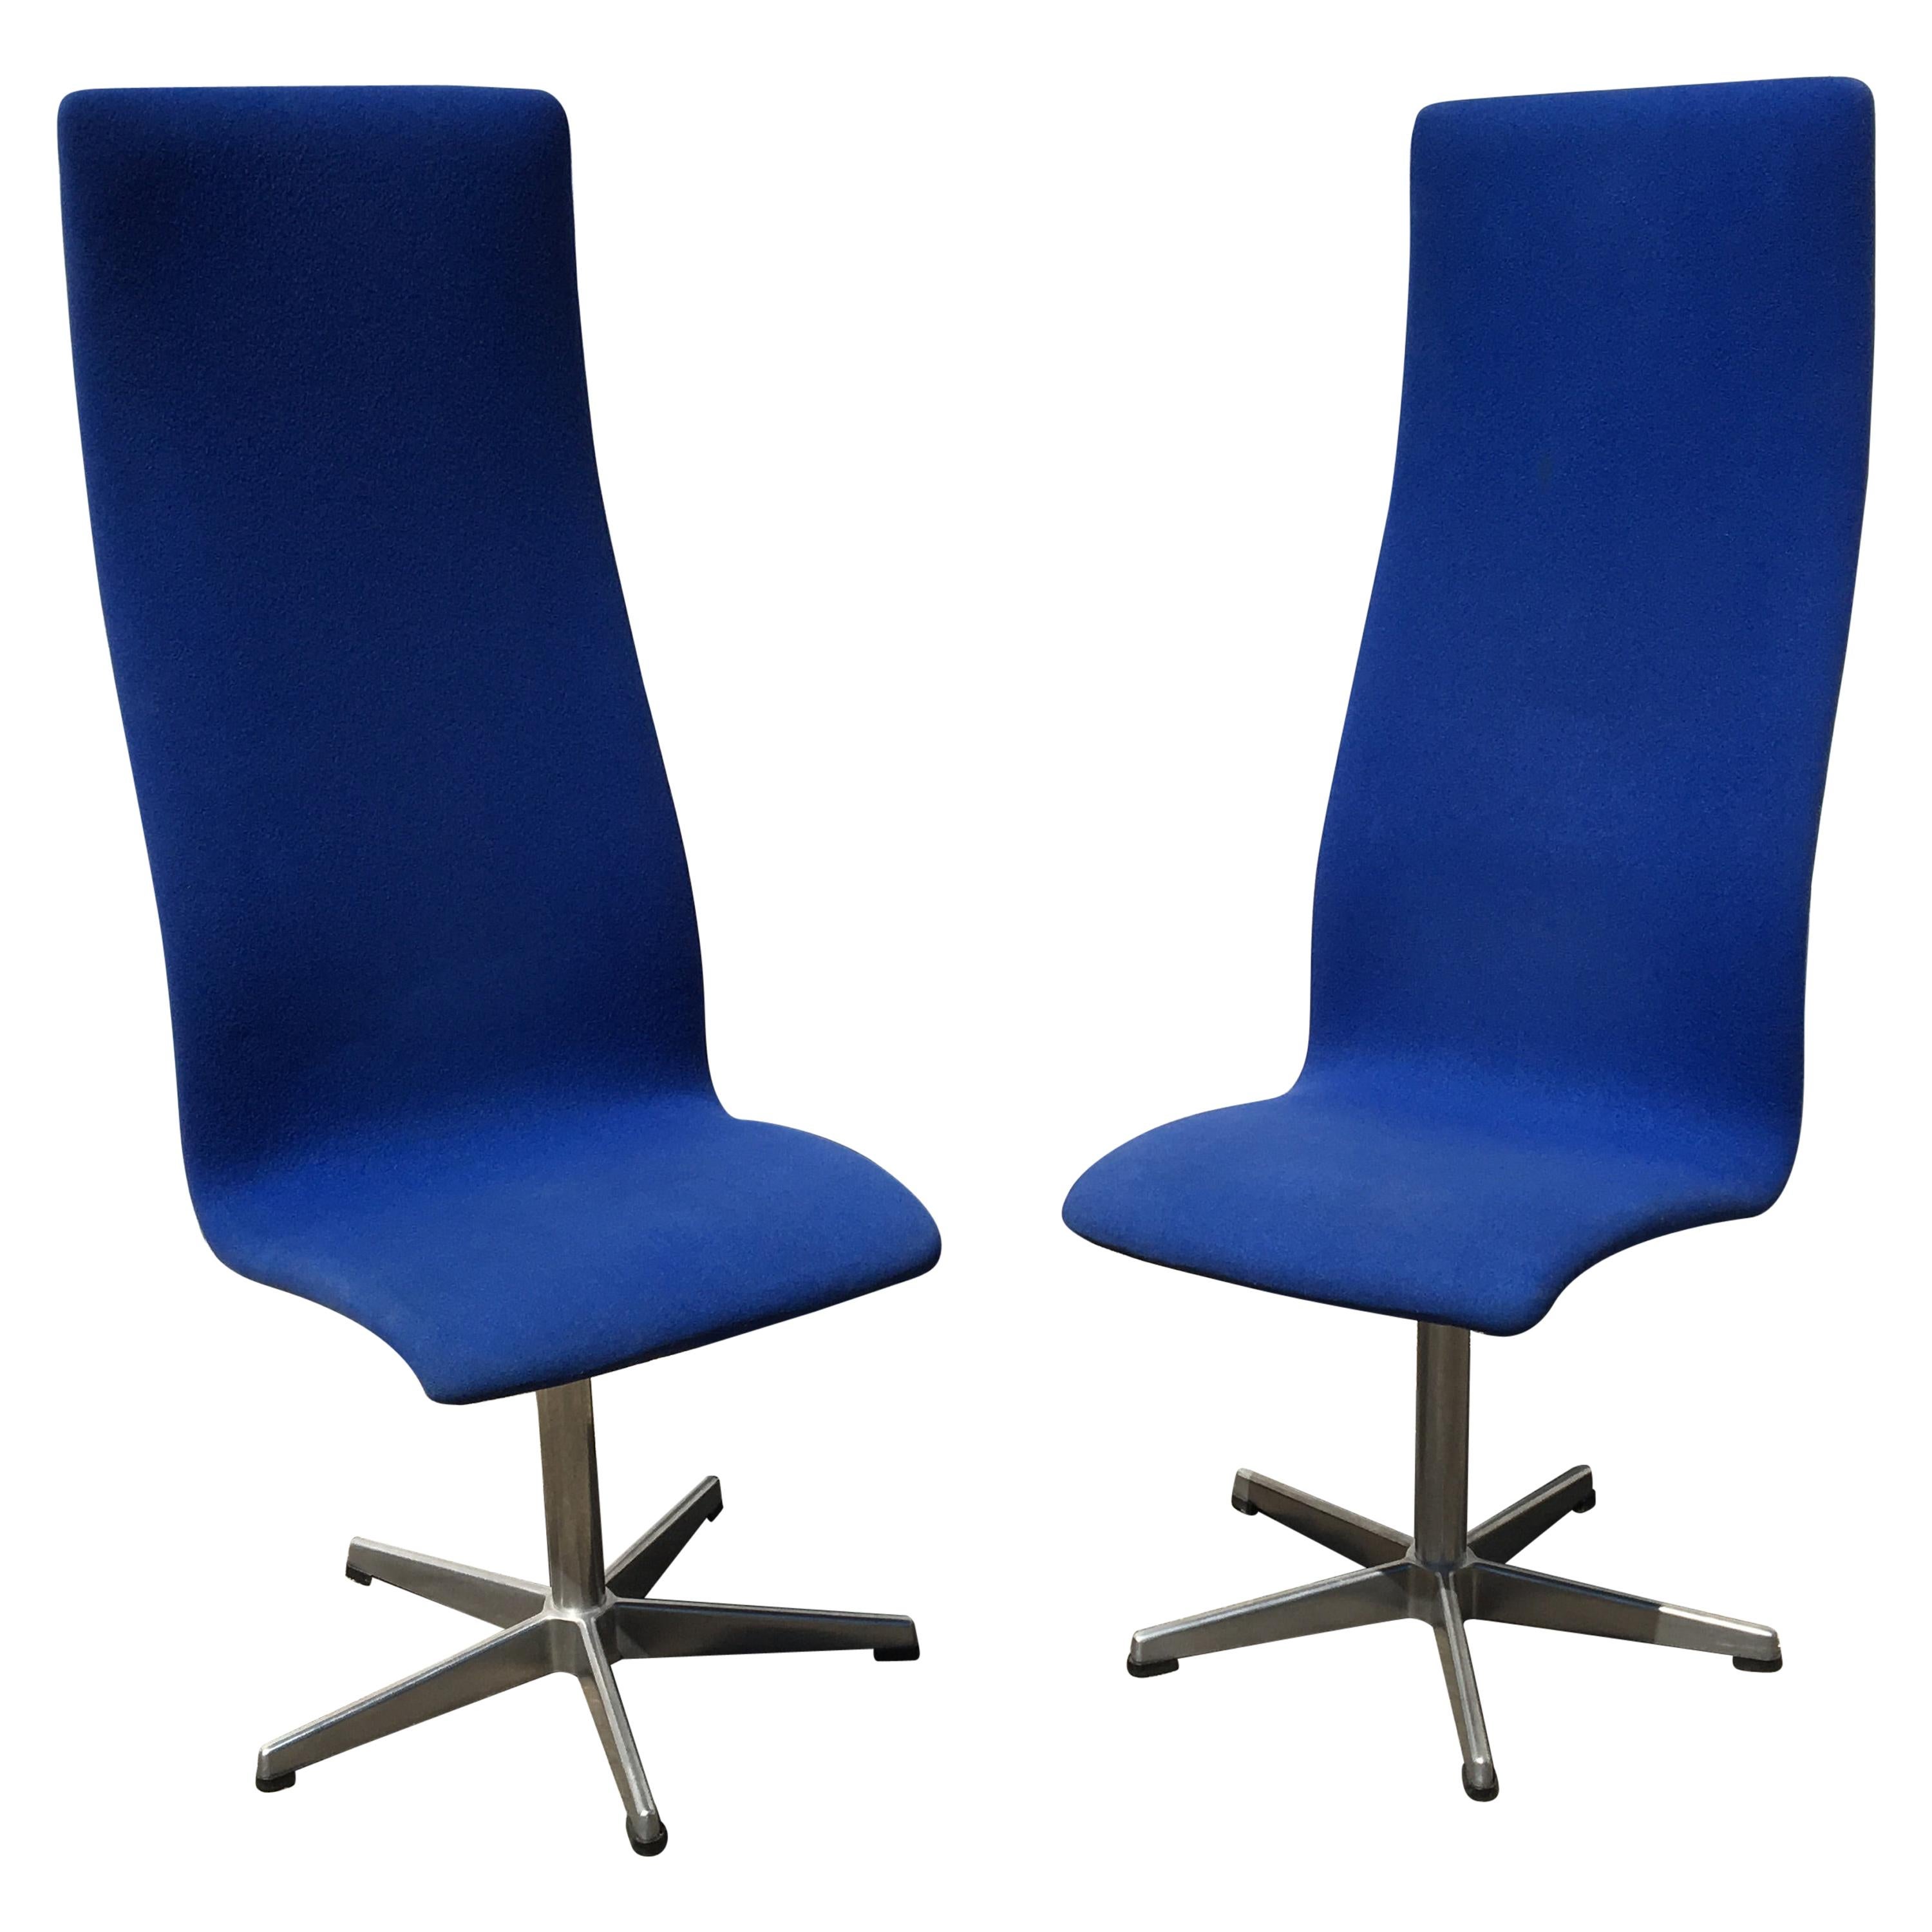 Oxford Chairs Model AJ 3273 by Arne Jacobsen For Sale